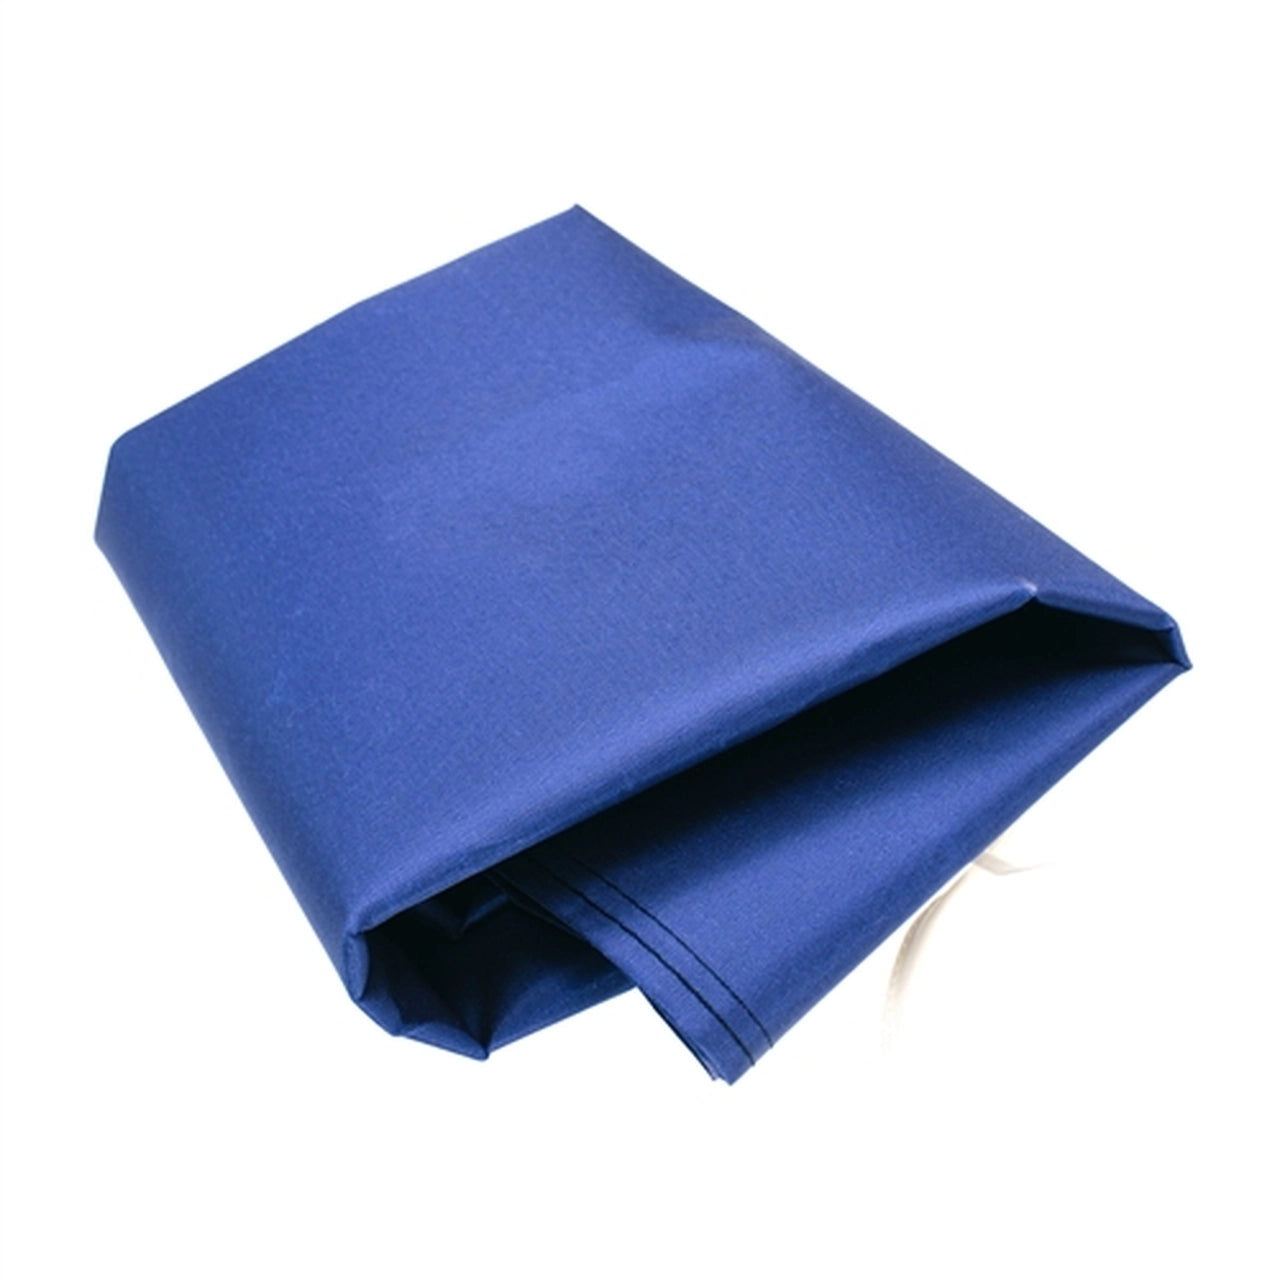 Aleko Protective Awning Cover - 16 x 10 Feet - Blue